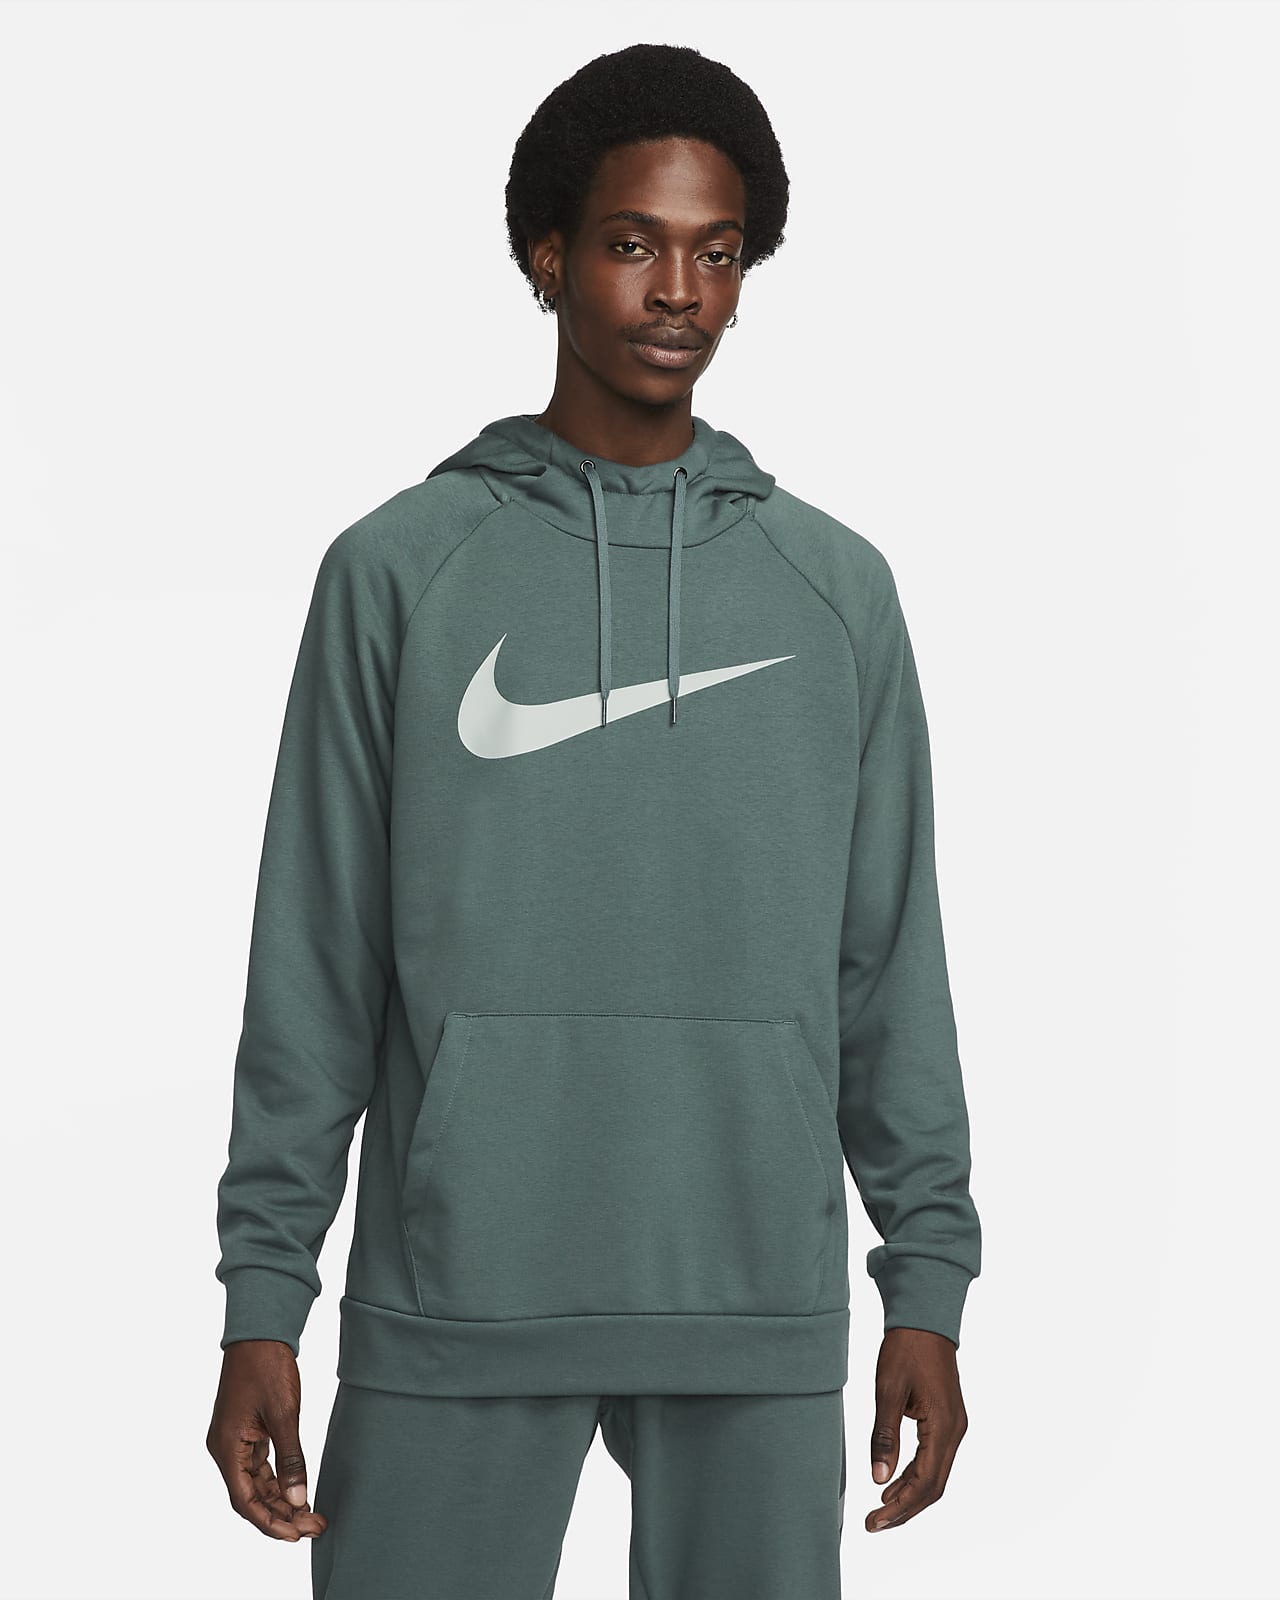 Nike Dry Graphic Men's Hooded Fitness Pullover Hoodie. UK